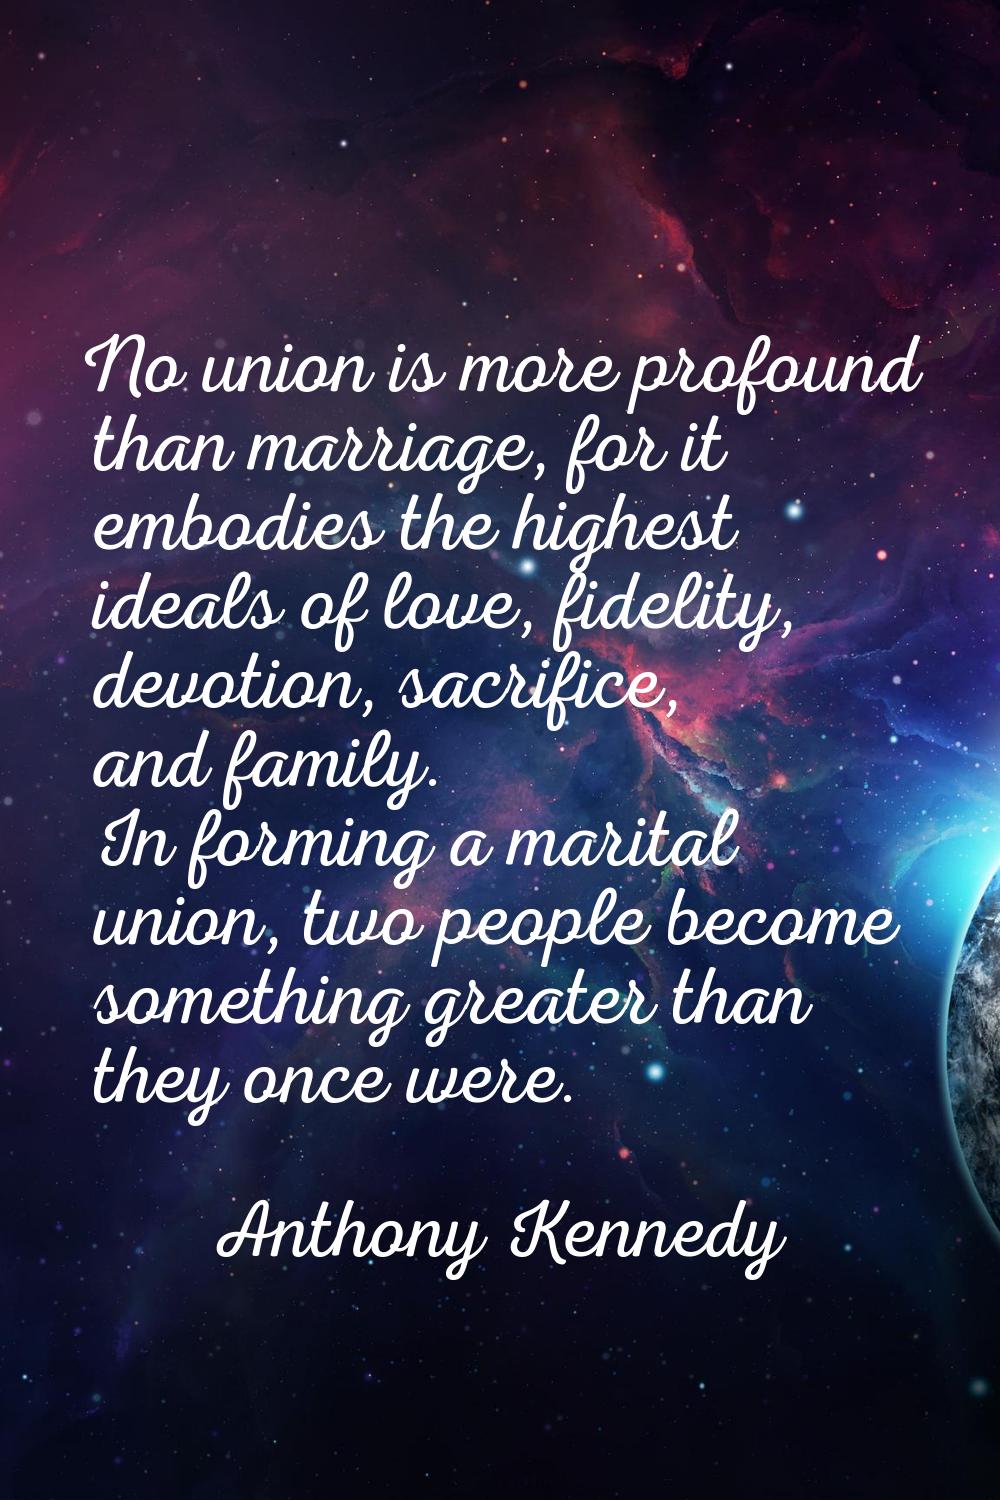 No union is more profound than marriage, for it embodies the highest ideals of love, fidelity, devo